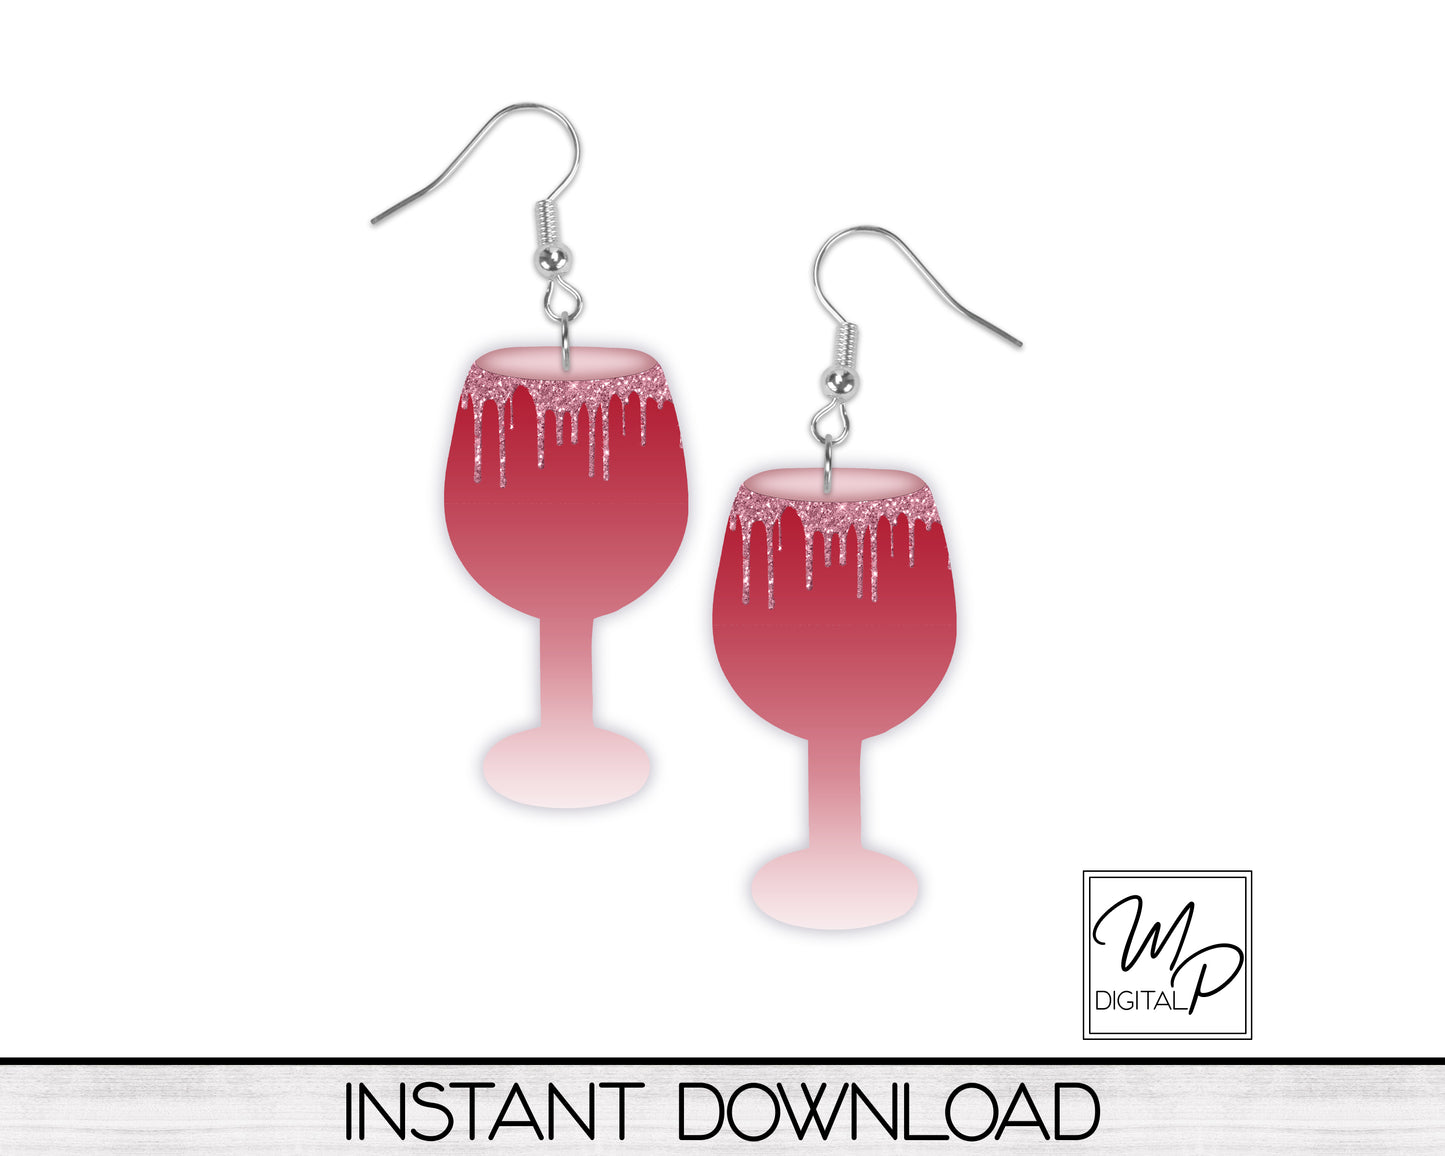 Wine Diva Sublimation Design for Keychains and Earrings, PNG Digital Download, Commercial Use